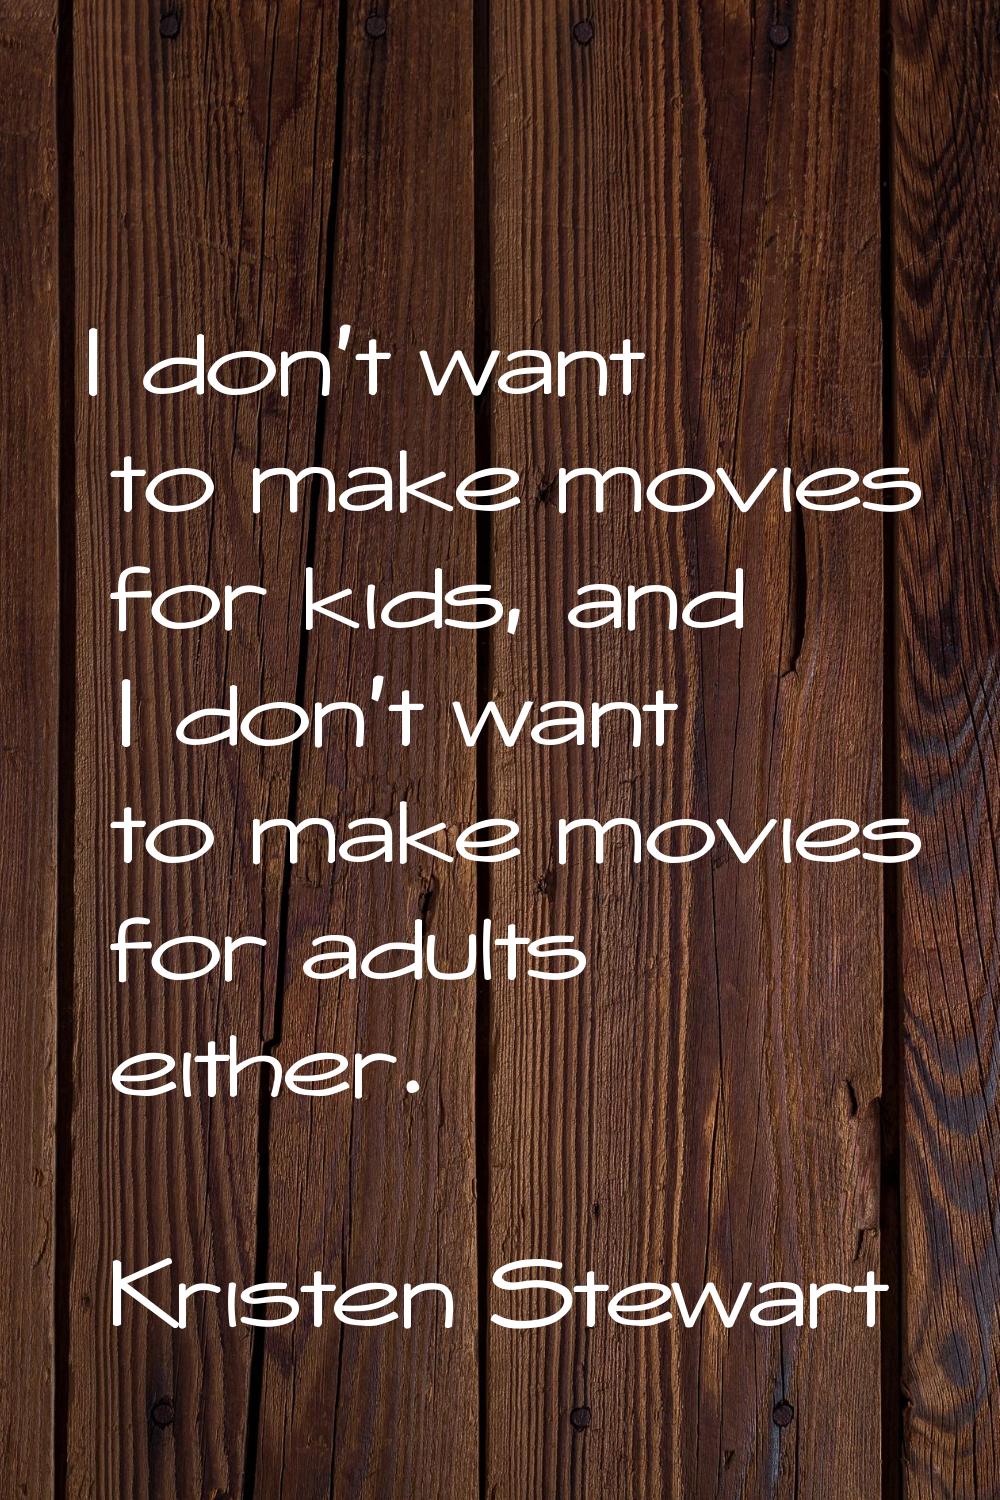 I don't want to make movies for kids, and I don't want to make movies for adults either.